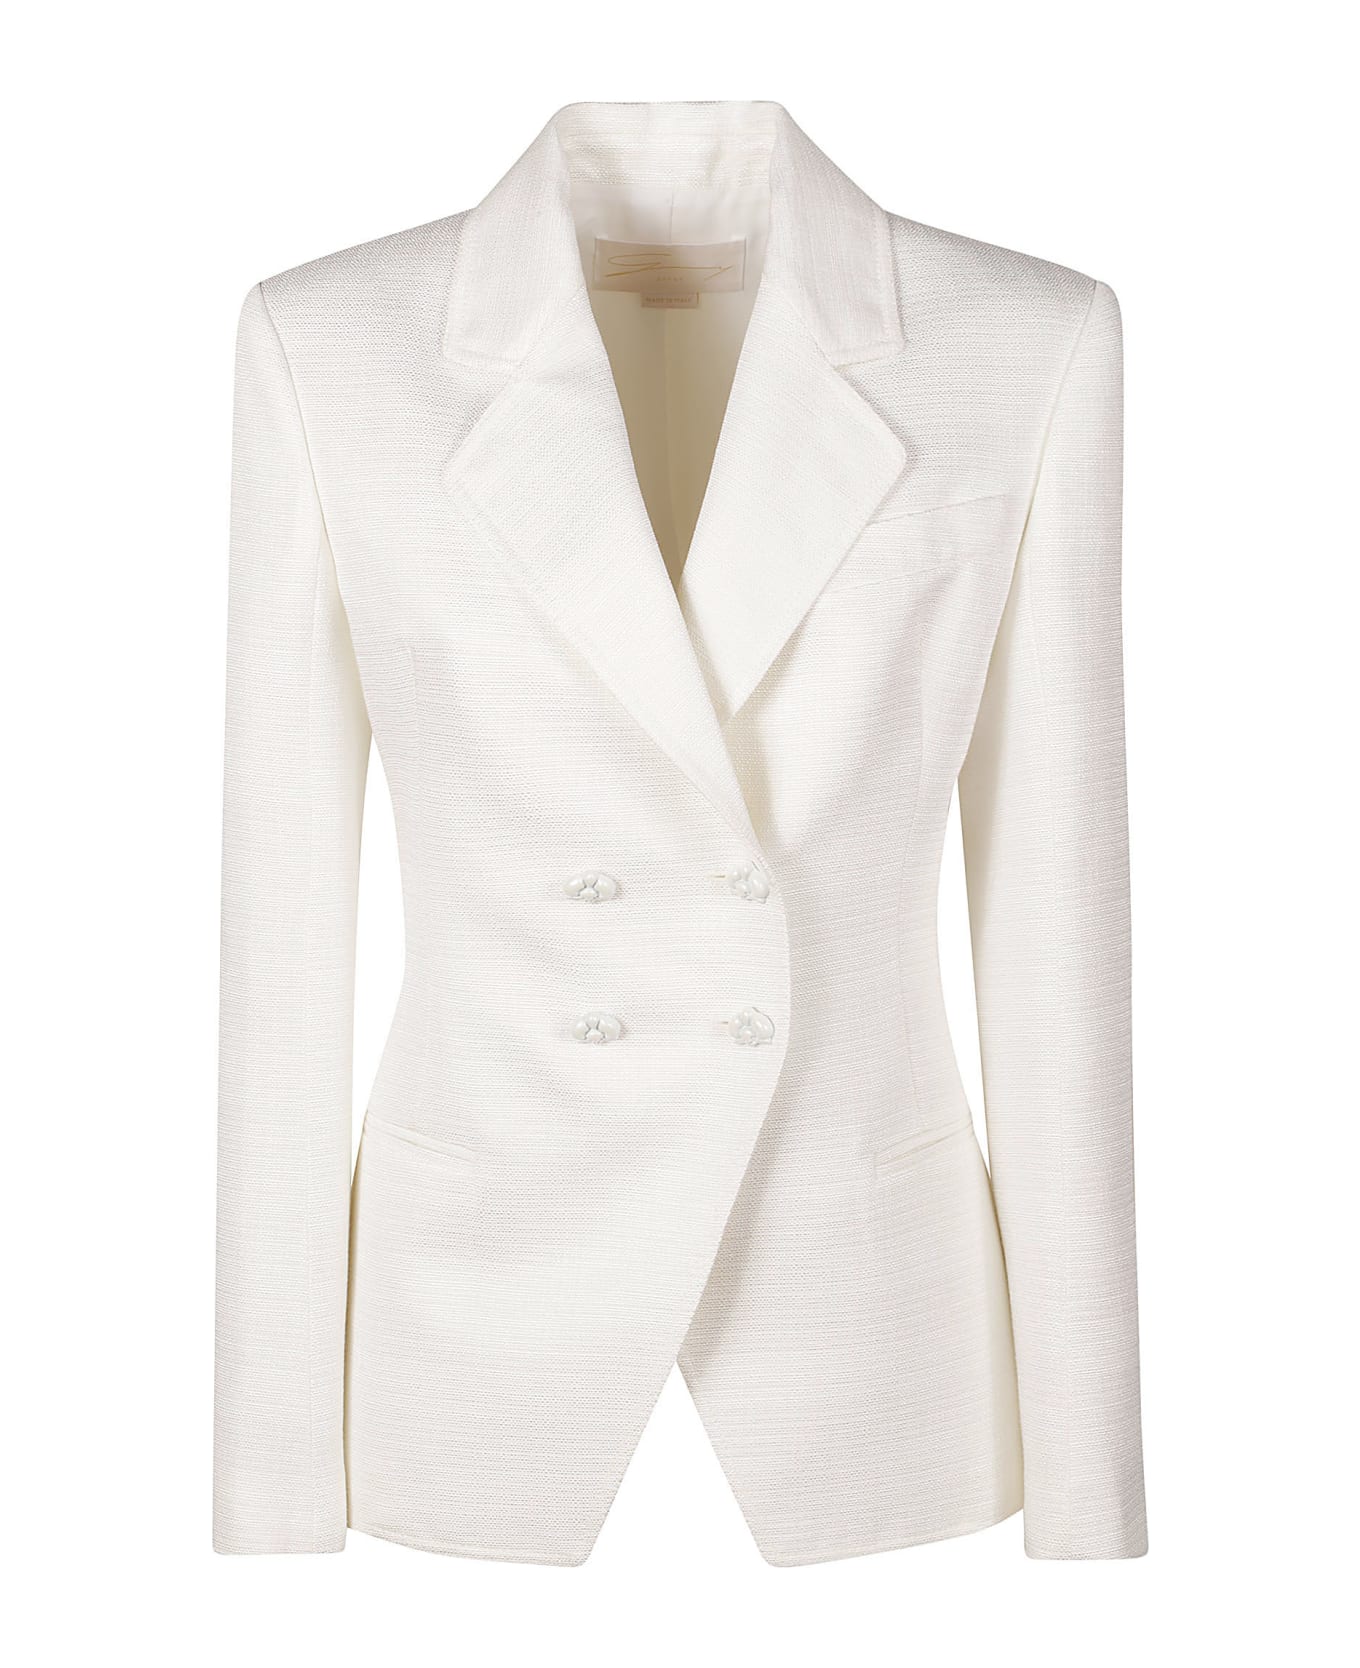 Genny Double-breasted Plain Dinner Jacket - White